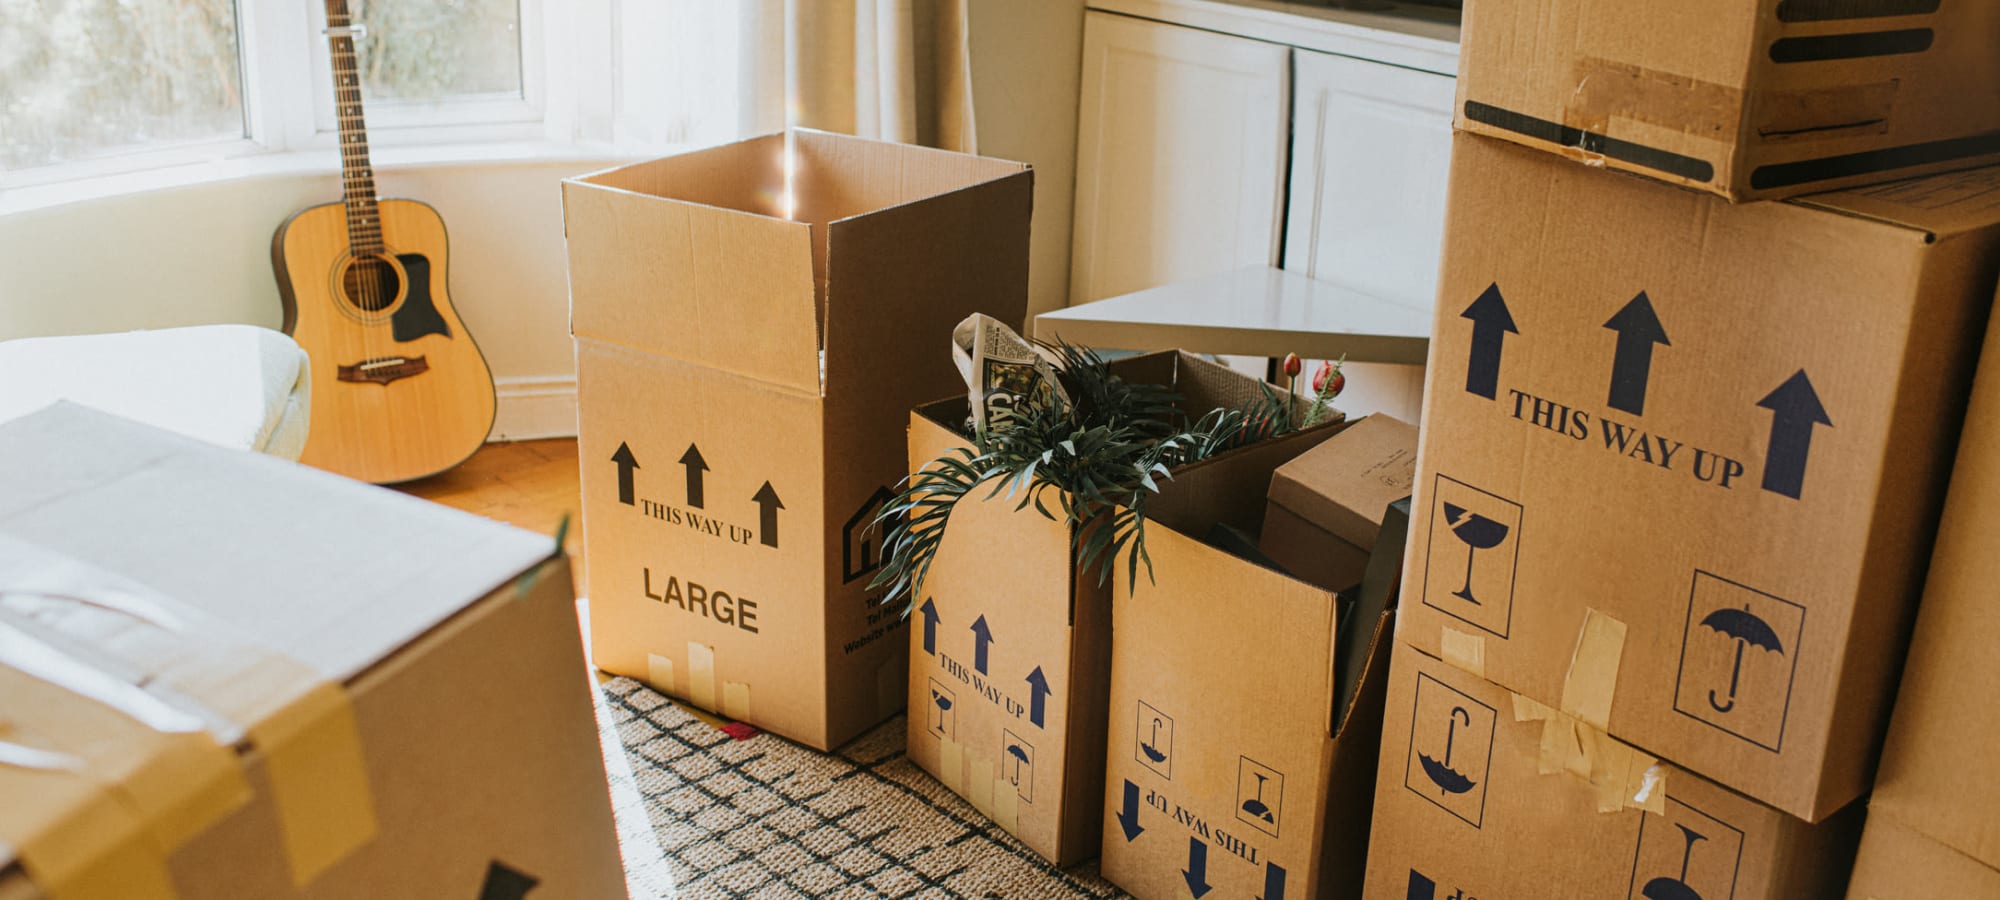 Packed boxes in a home near modSTORAGE in Aspen, Colorado